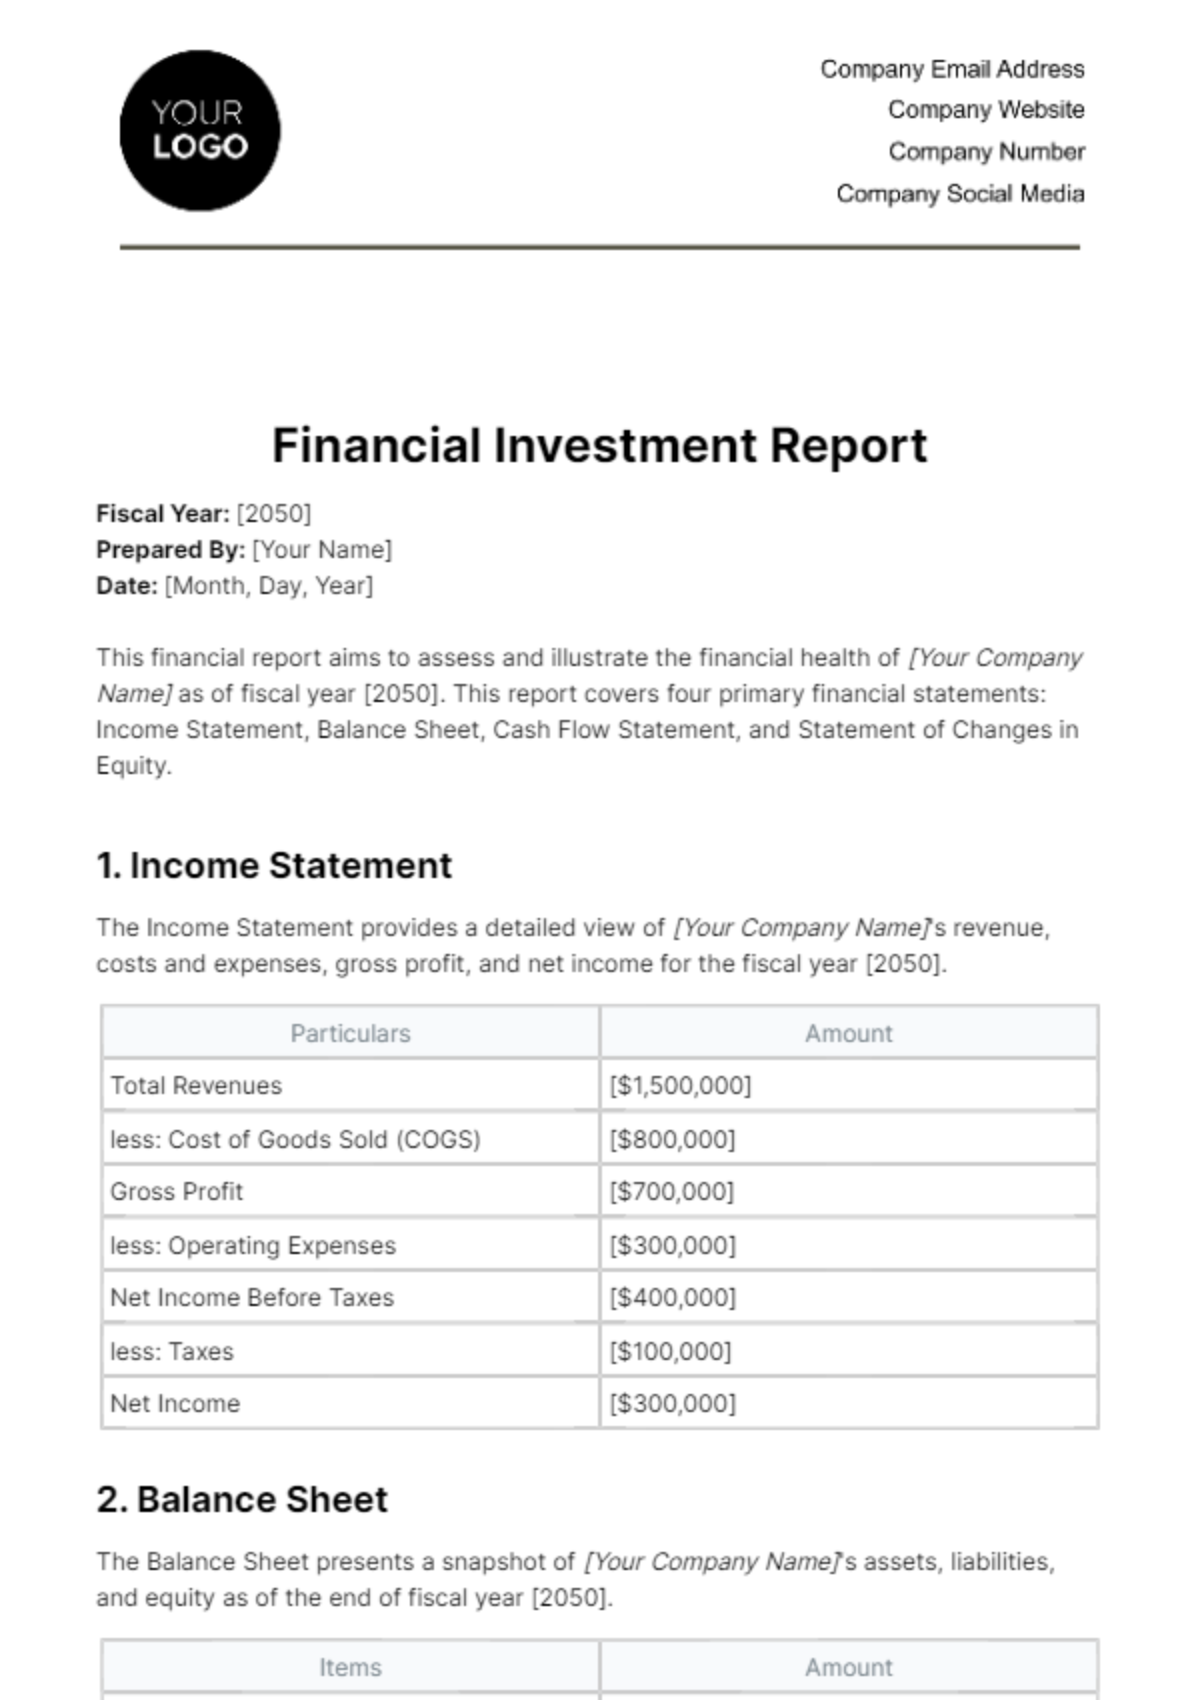 Free Financial Investment Report Template